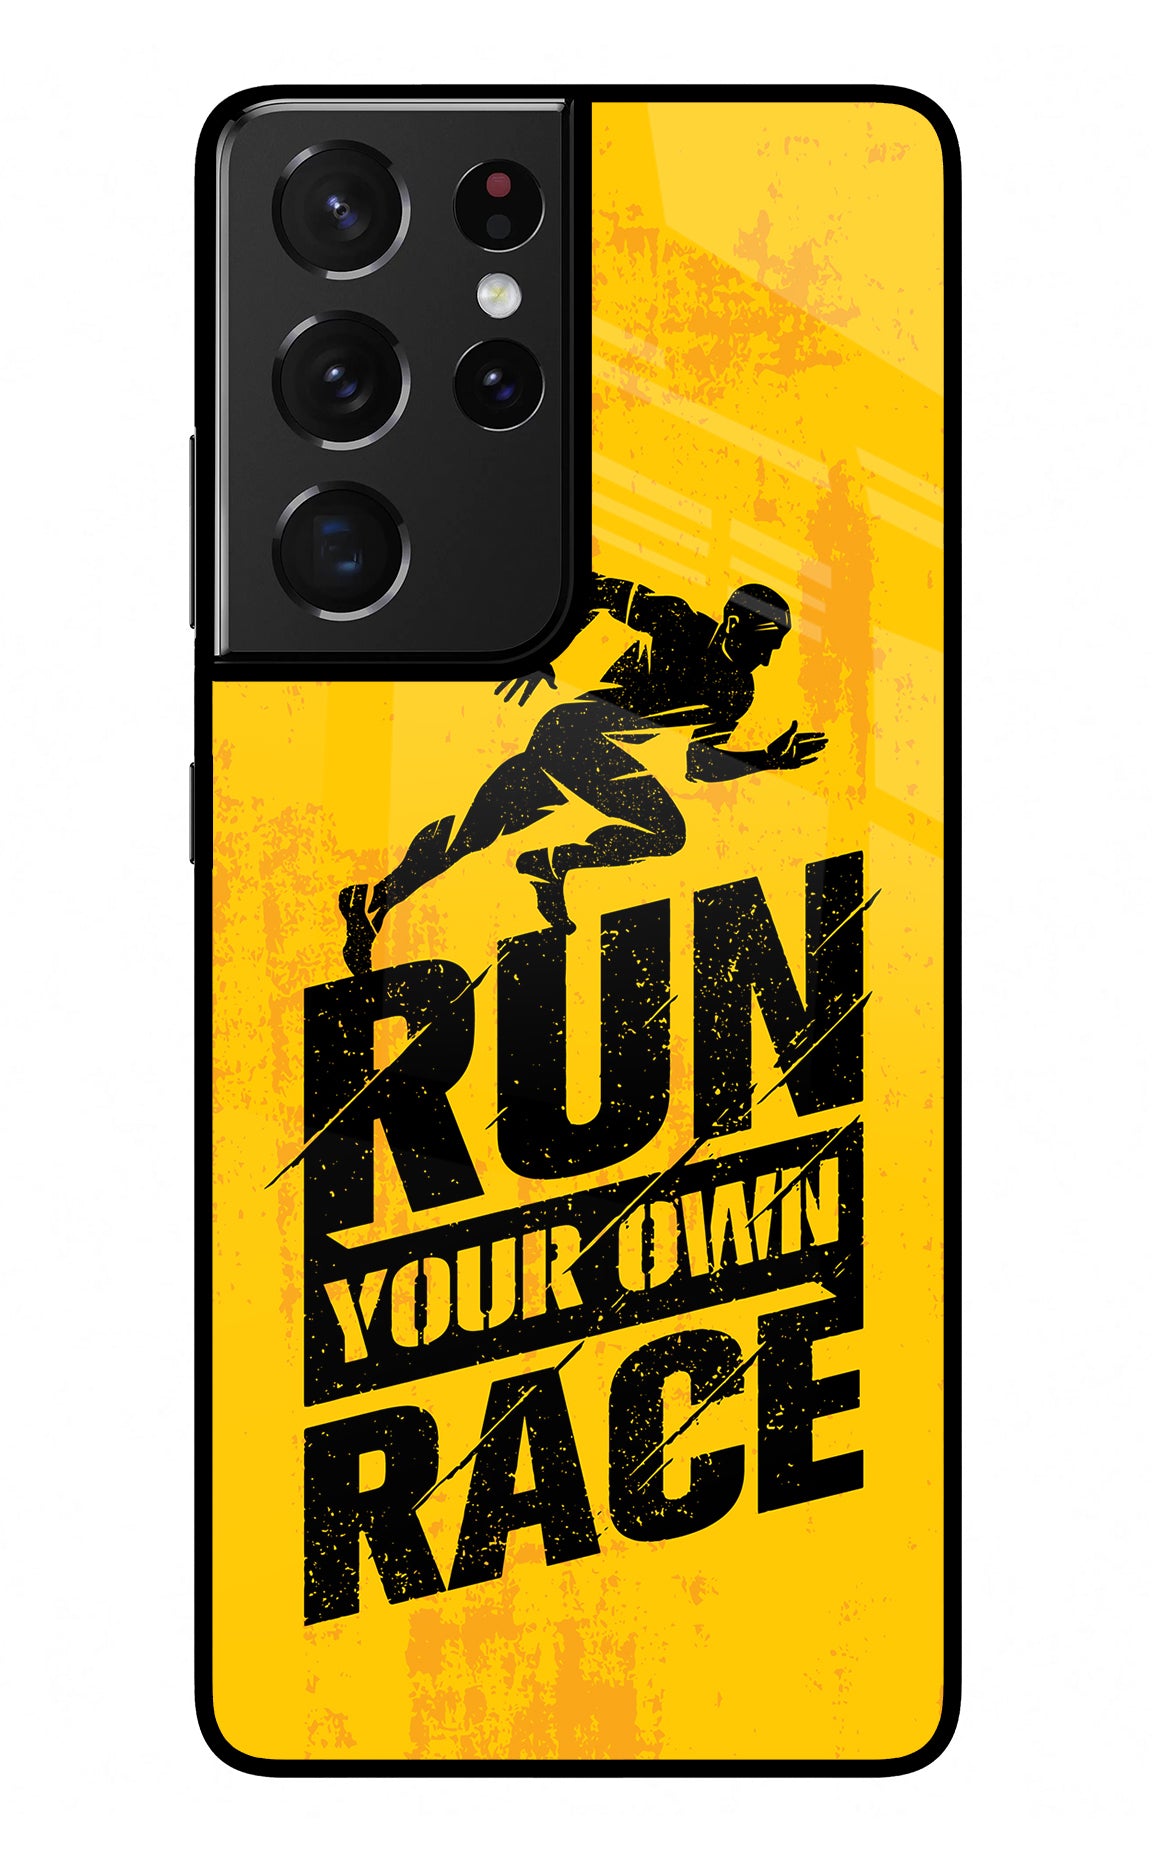 Run Your Own Race Samsung S21 Ultra Back Cover